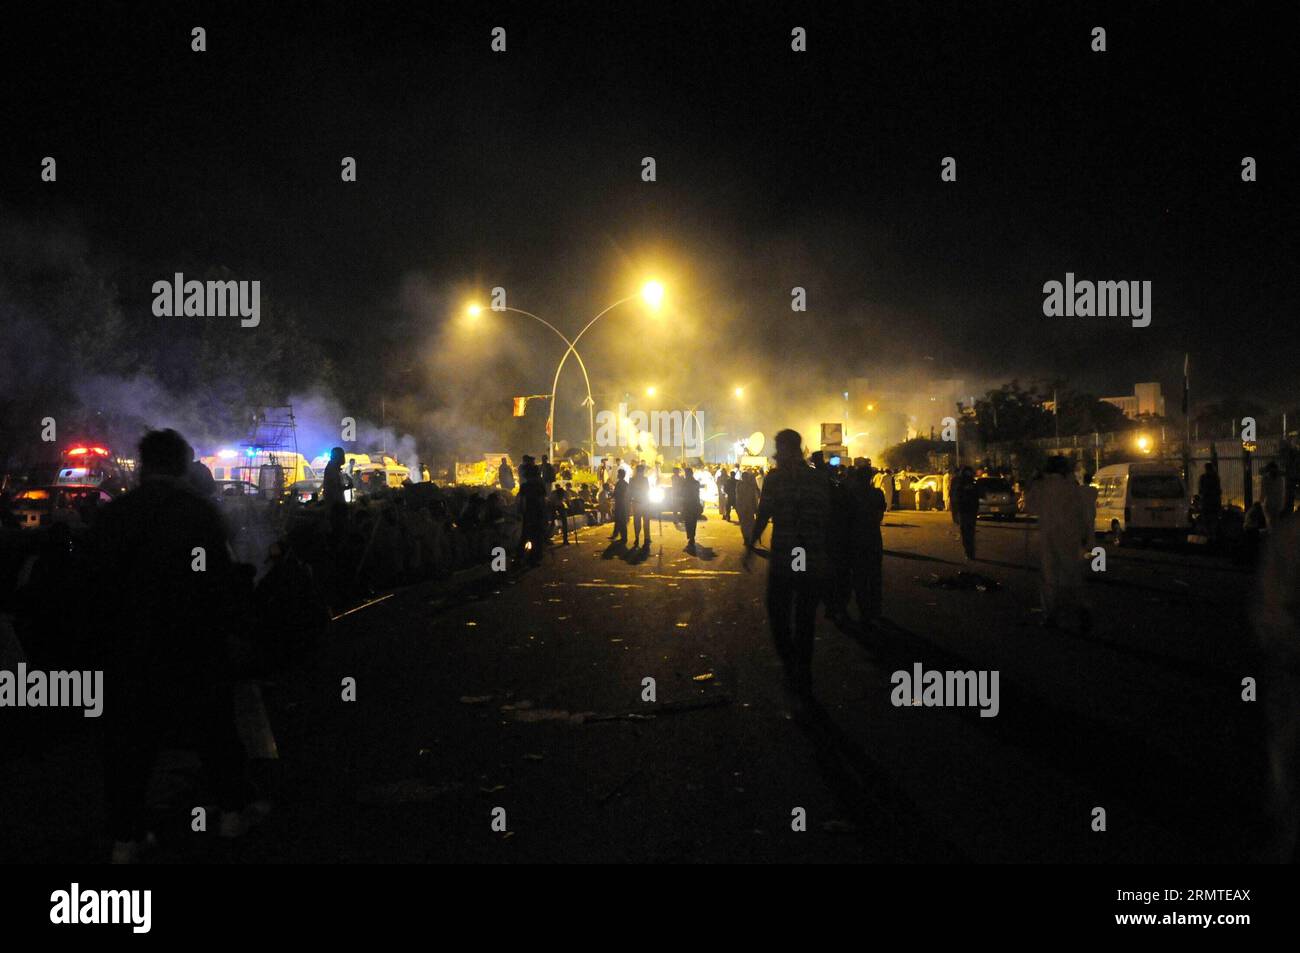 (140831) -- ISLAMABAD, Aug. 31, 2014 -- Pakistani protesters disperse following clashes with security forces near the prime minister s residence in Islamabad, capital of Pakistan on Aug. 31, 2014. At least 450 people were injured when clashes broke out between police and protesters after a 17- day long peaceful sit-in in Pakistan s capital city of Islamabad on Saturday night, local media reported Sunday. ) PAKISTAN-ISLAMABAD-PROTEST-CLASHES AhmadxKamal PUBLICATIONxNOTxINxCHN   Islamabad Aug 31 2014 Pakistani protesters  following clashes With Security Forces Near The Prime Ministers S Residenc Stock Photo